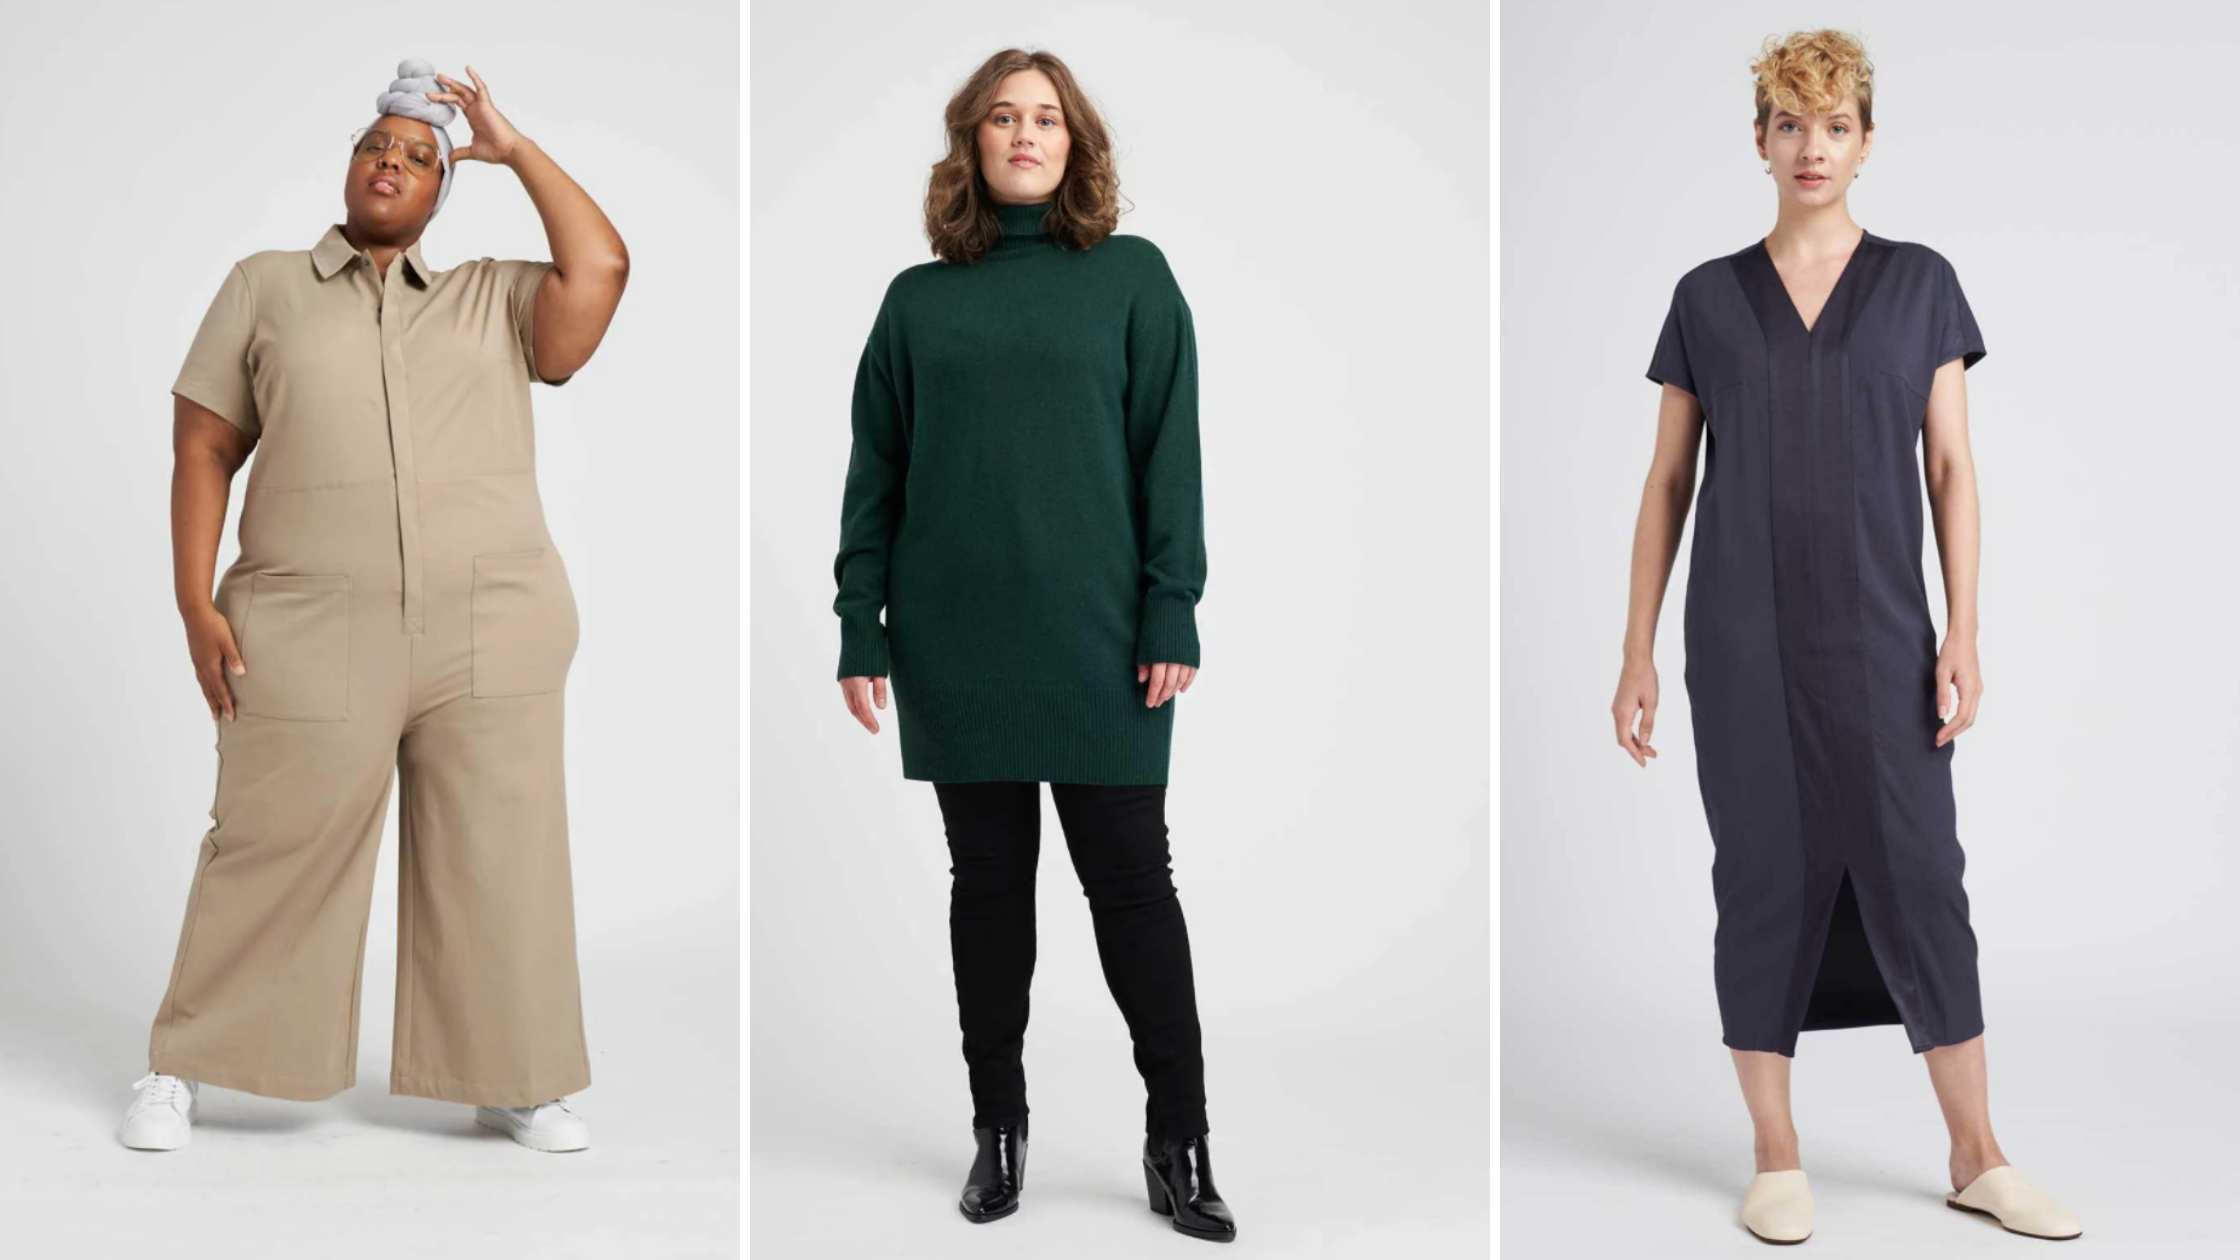 Masculine of center plus size clothing options